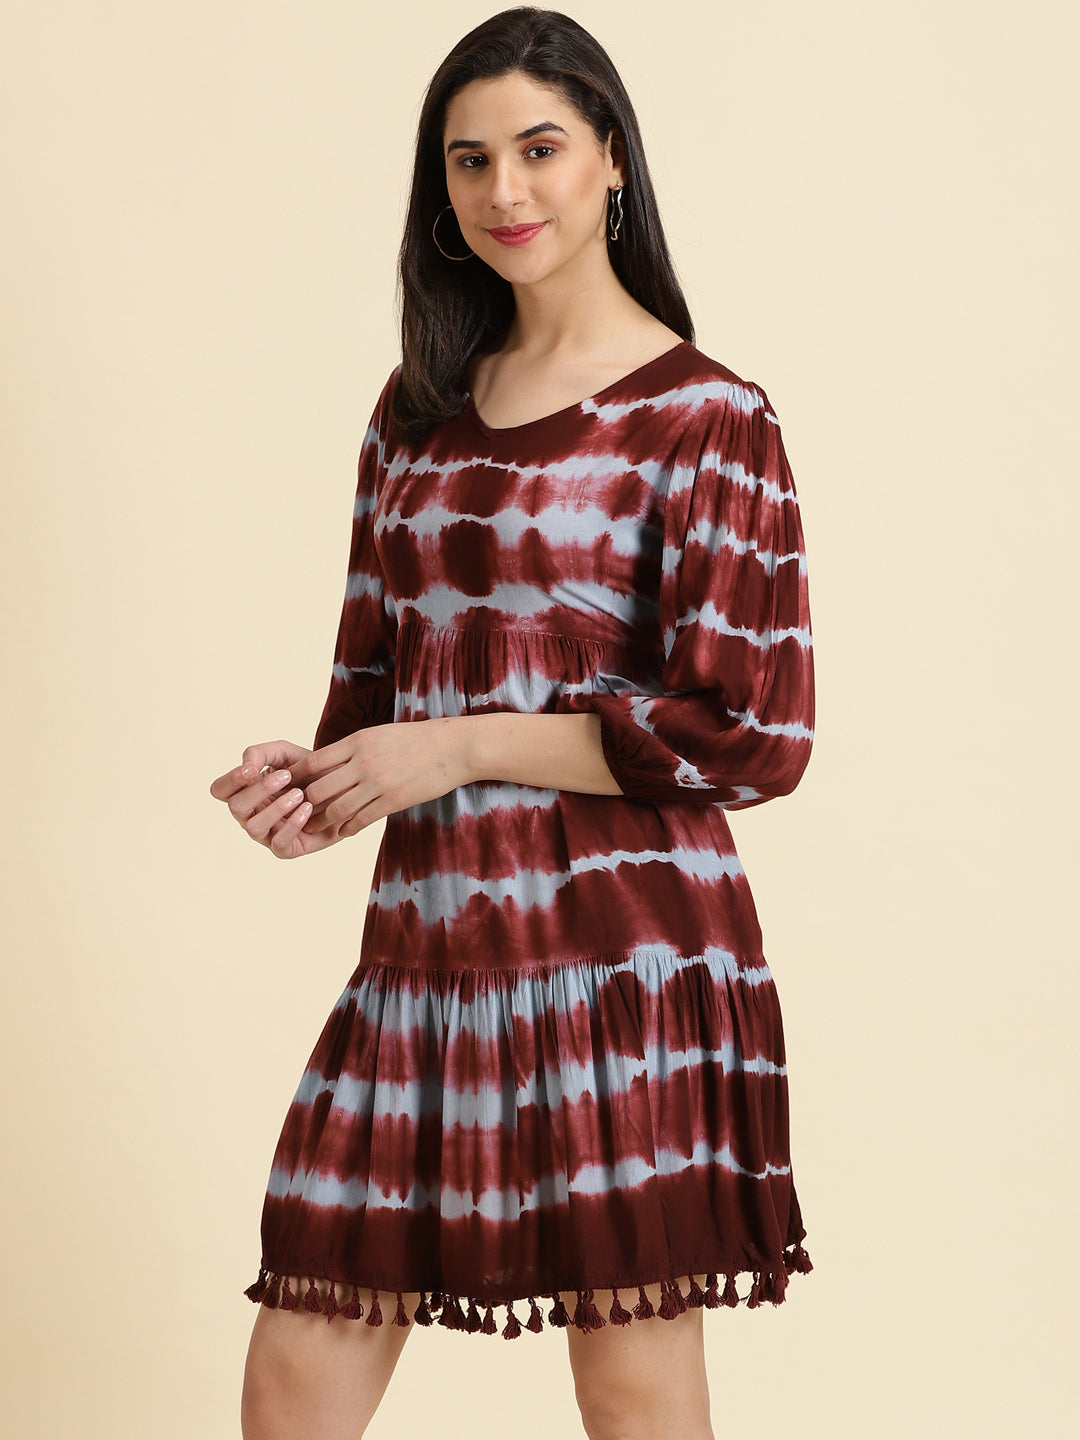 Women's Burgundy Tie Dye Fit and Flare Dress